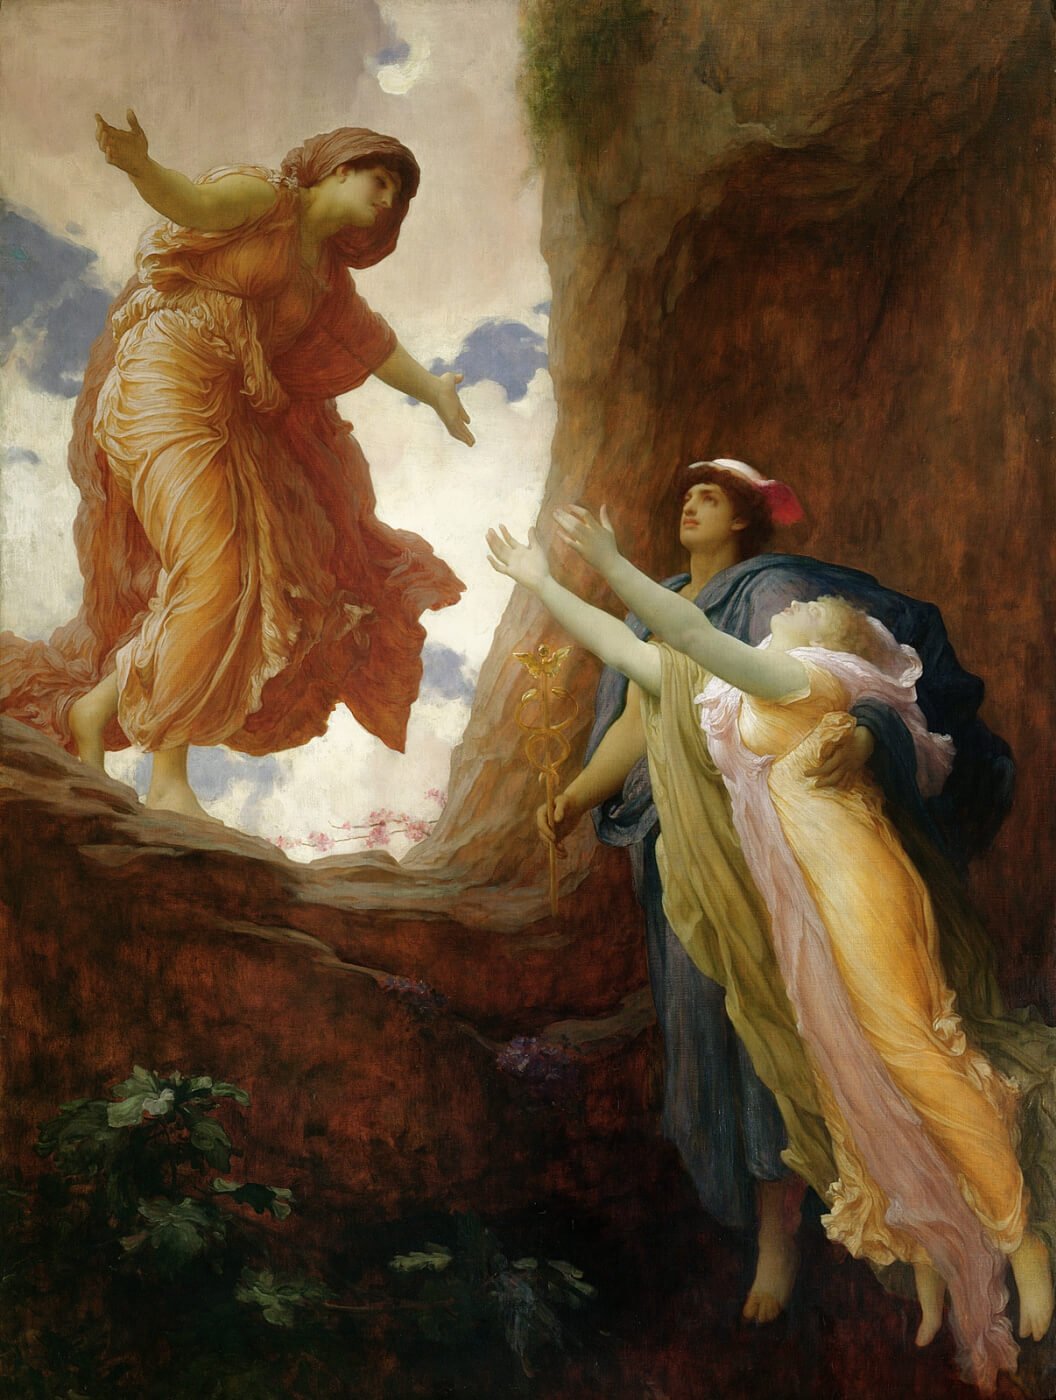 This painting represents Persephone that returns from the underworld for the first time, accompanied by Hermes. She meets her mother Demeter at the entrance to Hades.